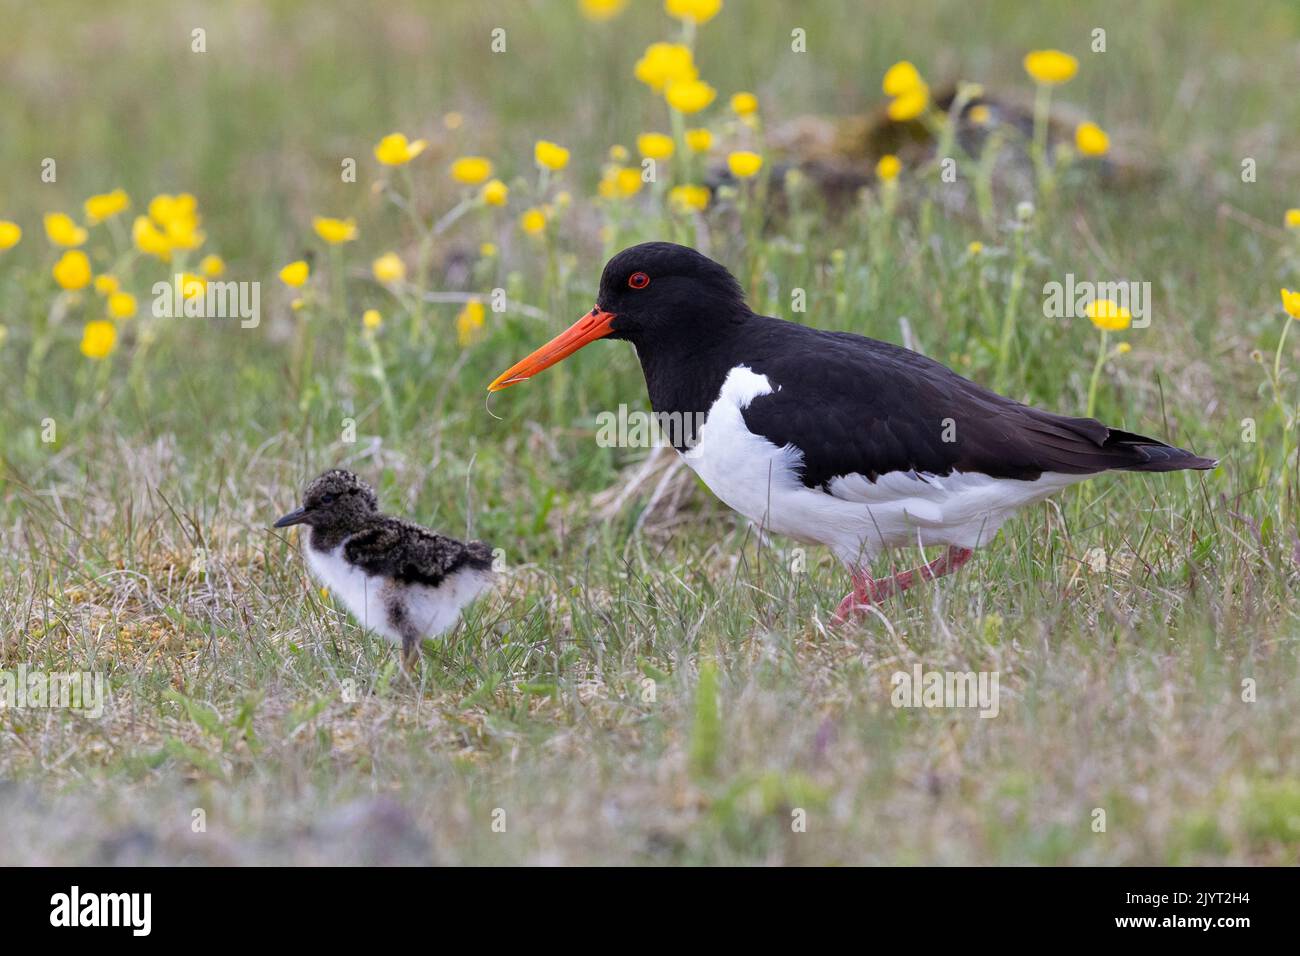 Eurasian Oystercatcher (Haematopus ostralegus), side view of an adult standing on the ground with a chick, Southern Region, Iceland Stock Photo